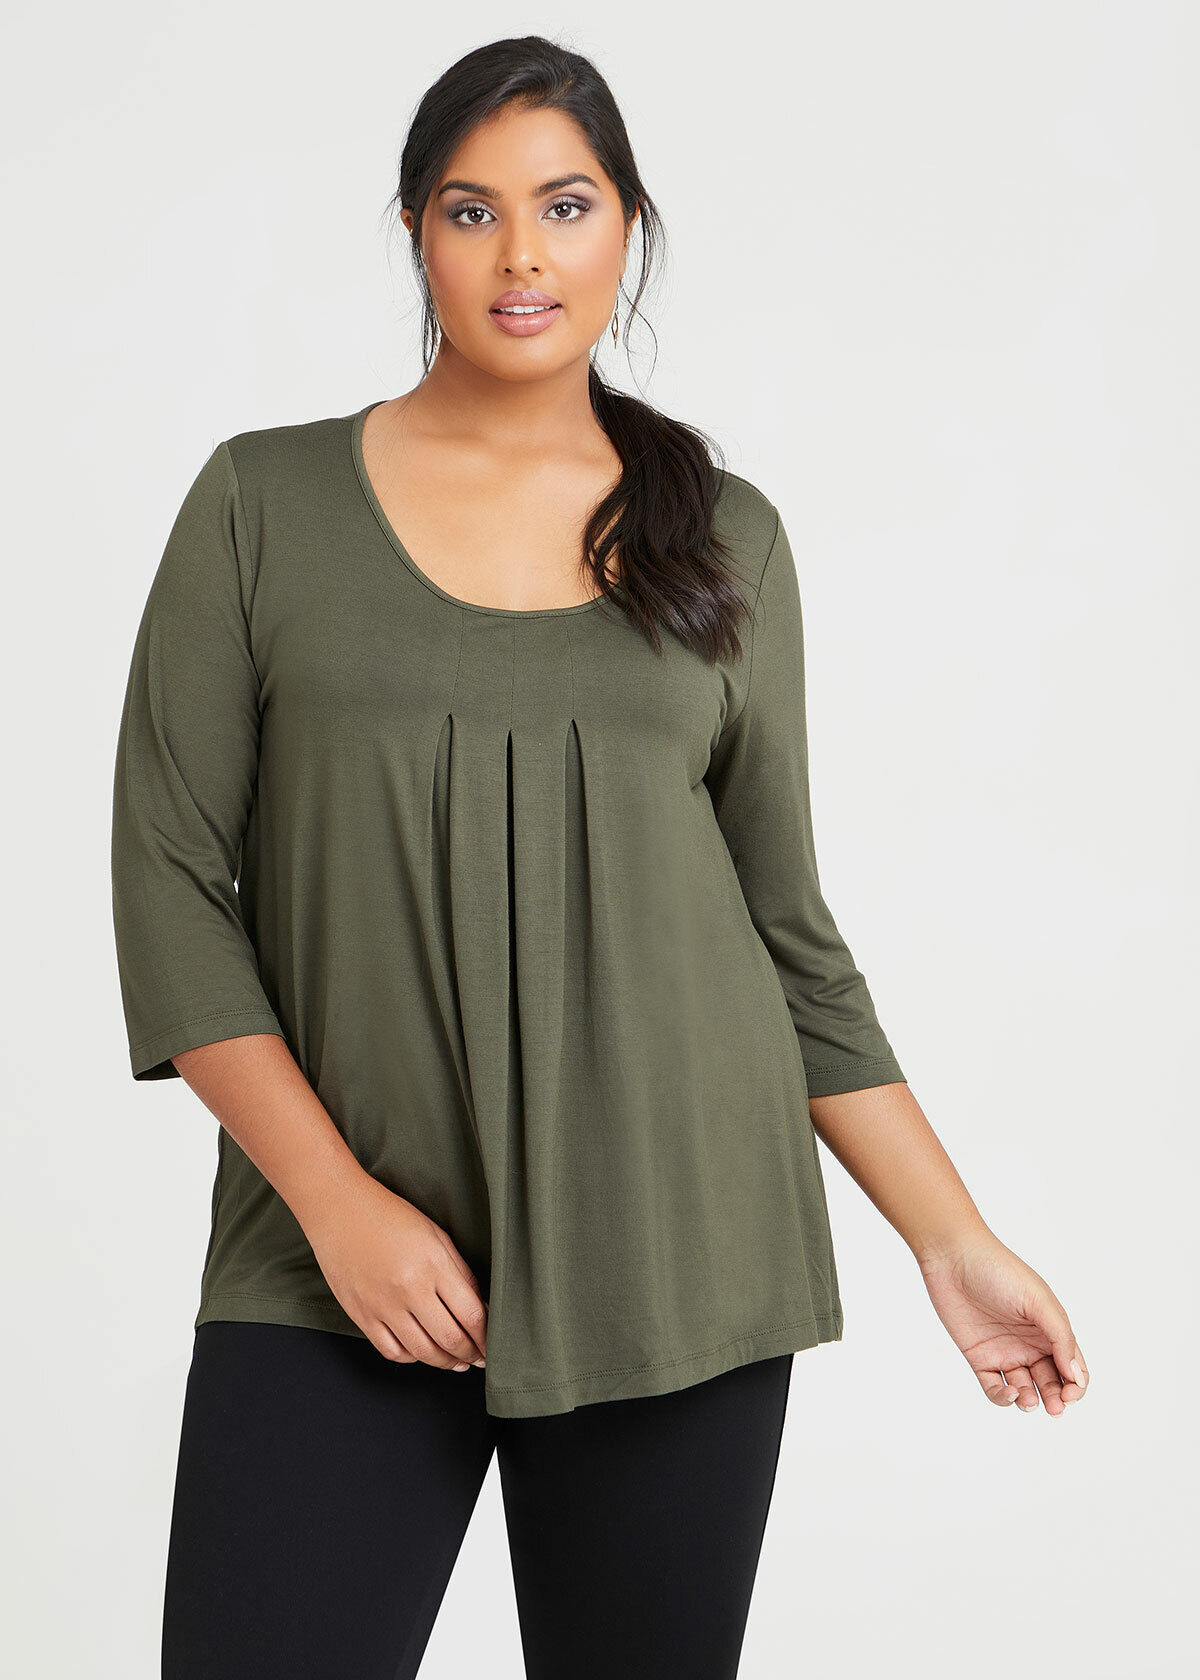 Plus Size Women's Clearance ☀ Outlet ...